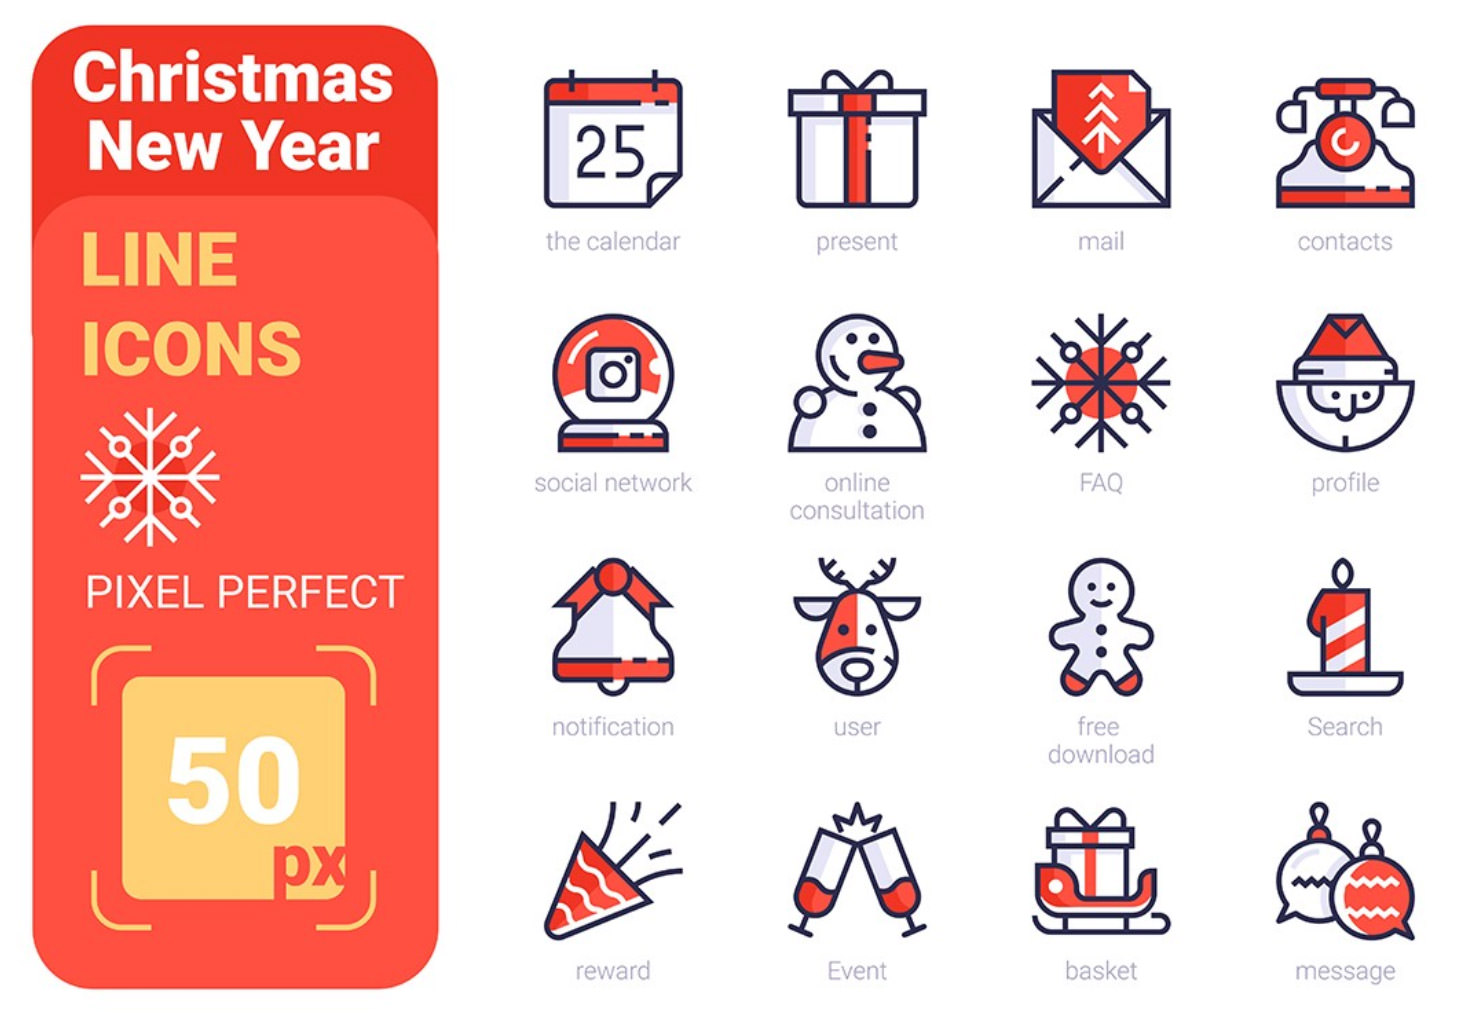 Christmas New Year Pixel Perfect Line icons